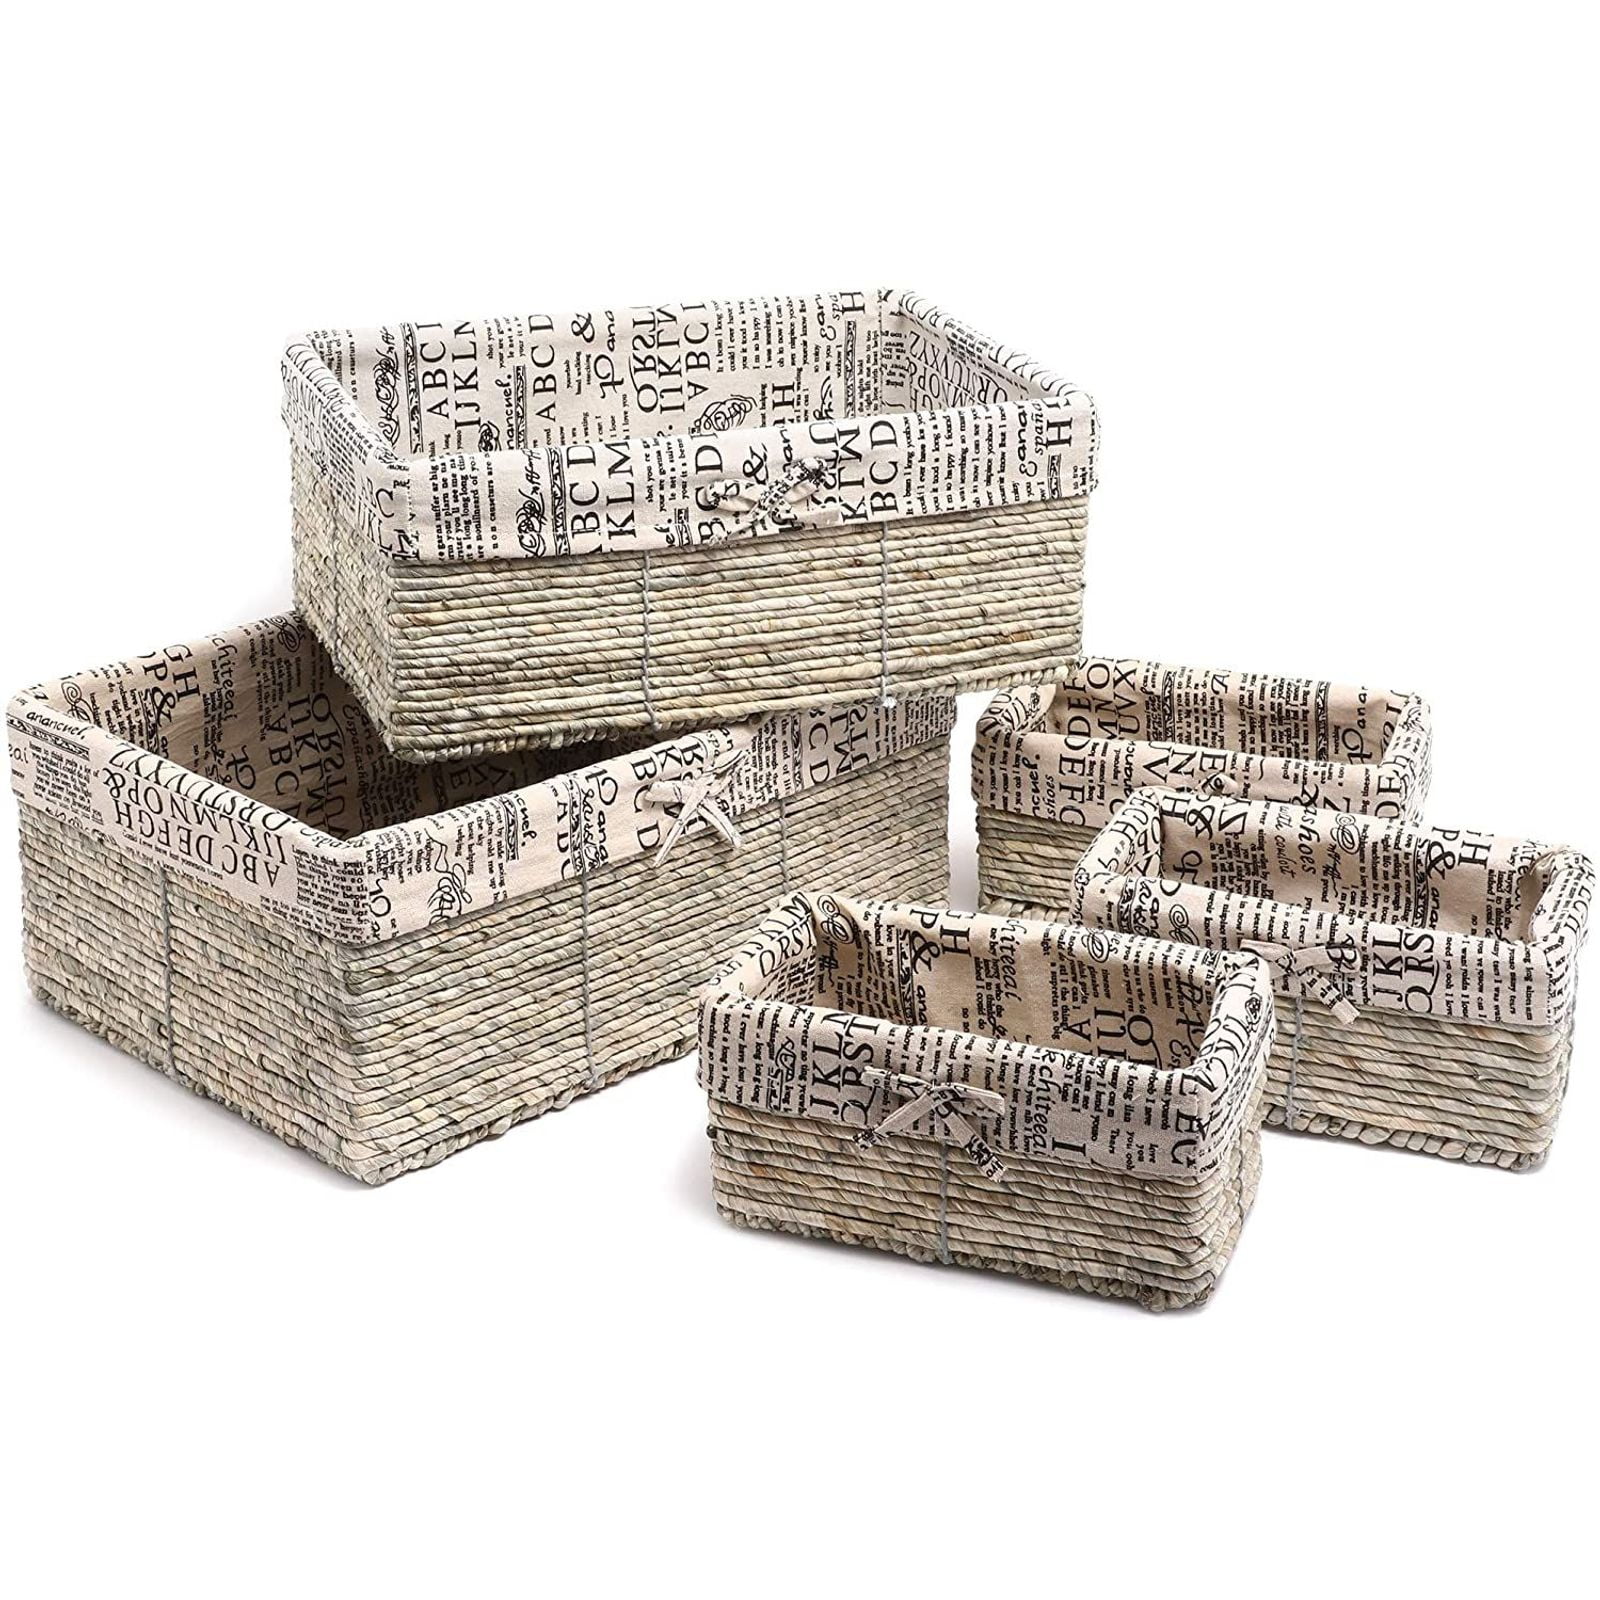 Synthetic Wicker Basket with Handles 35805 